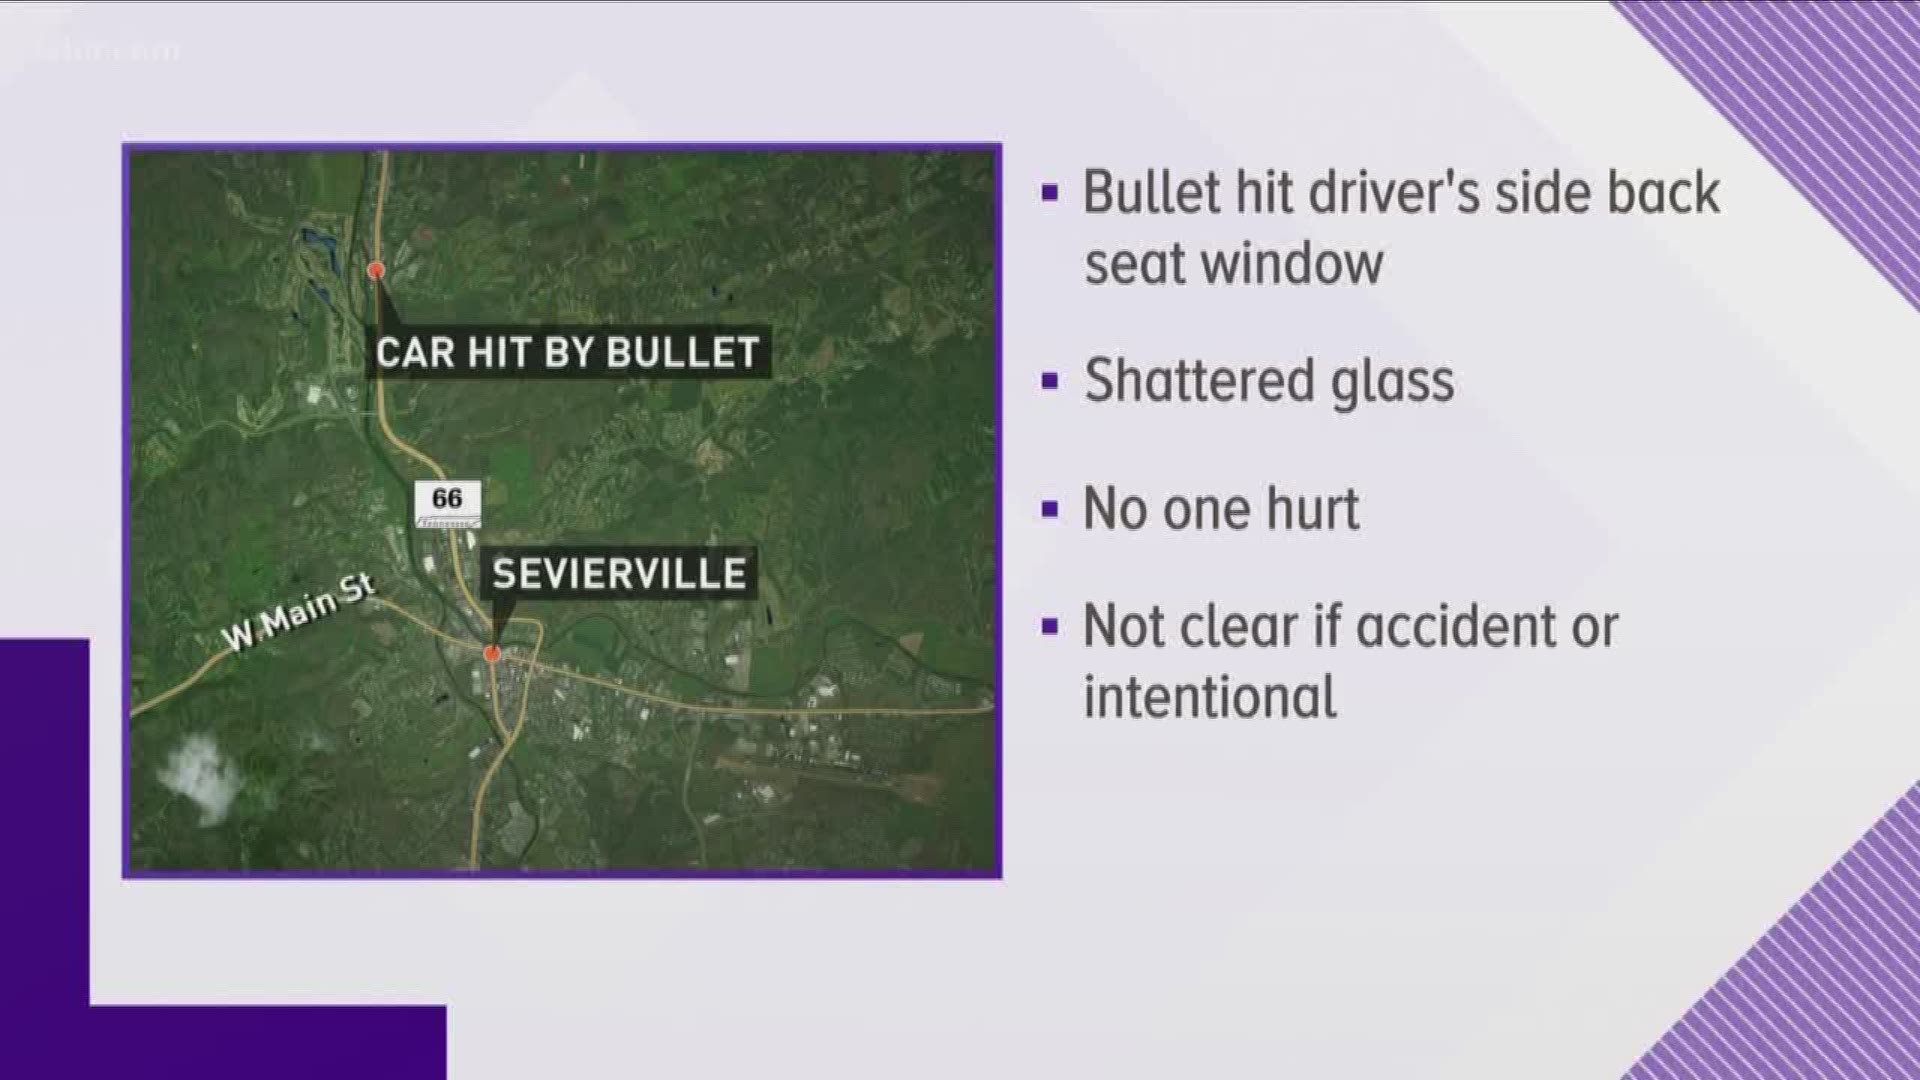 SPD officers responded to the report that a bullet hit a pick-up truck traveling southbound on Highway 66 just after noon on Monday. No one was hurt. Officers are investigating whether the shot was an accident or intentional.